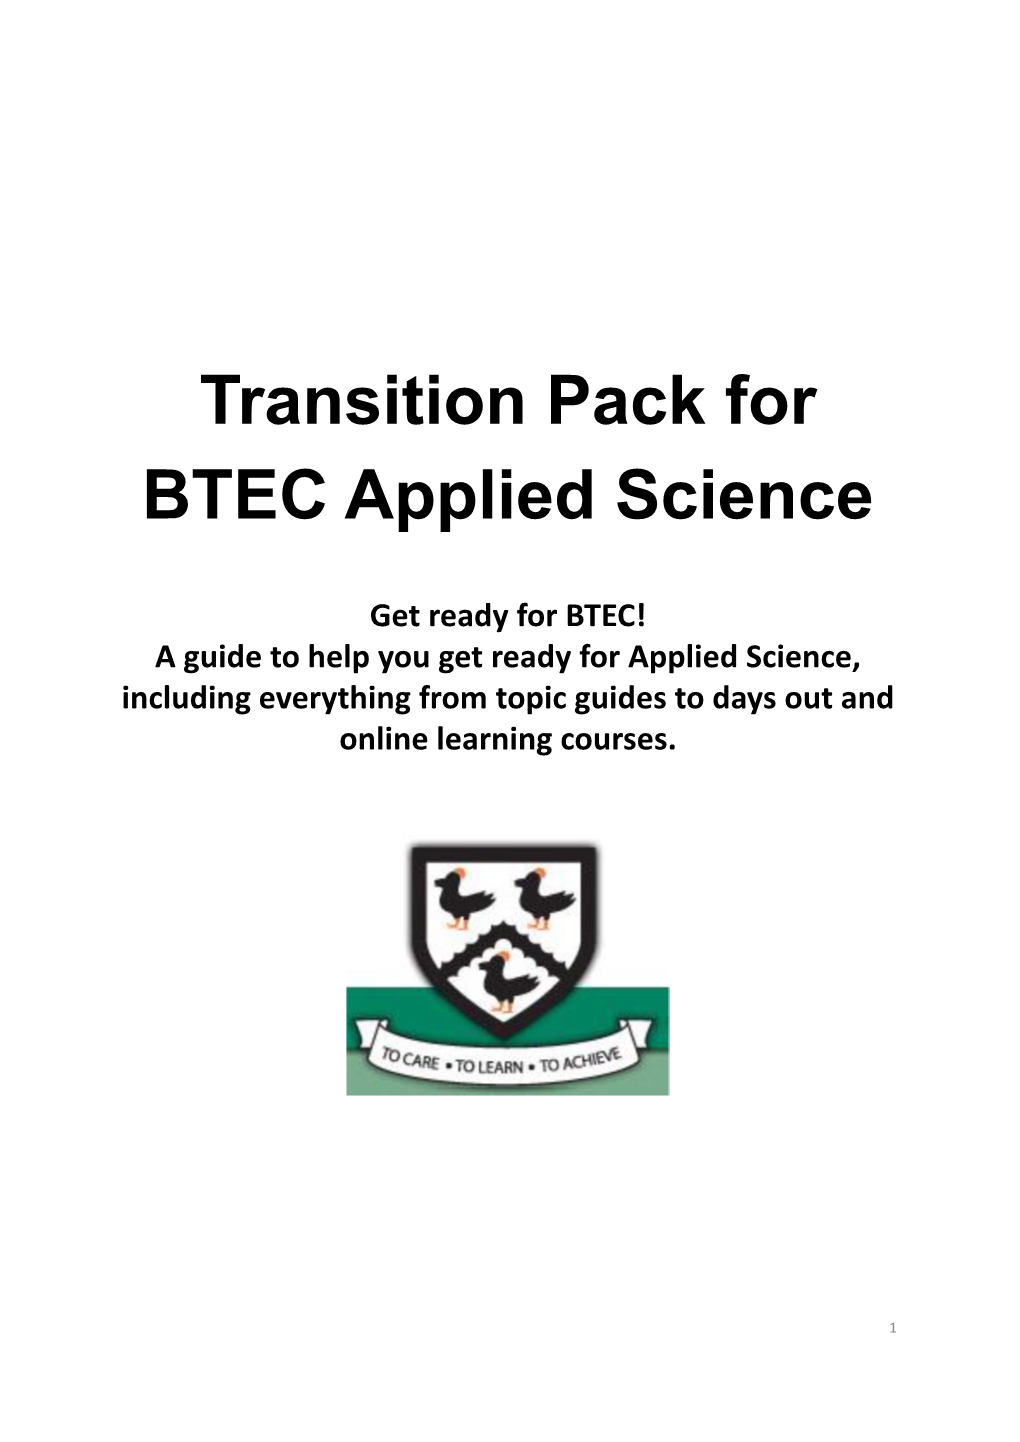 Transition Pack for BTEC Applied Science